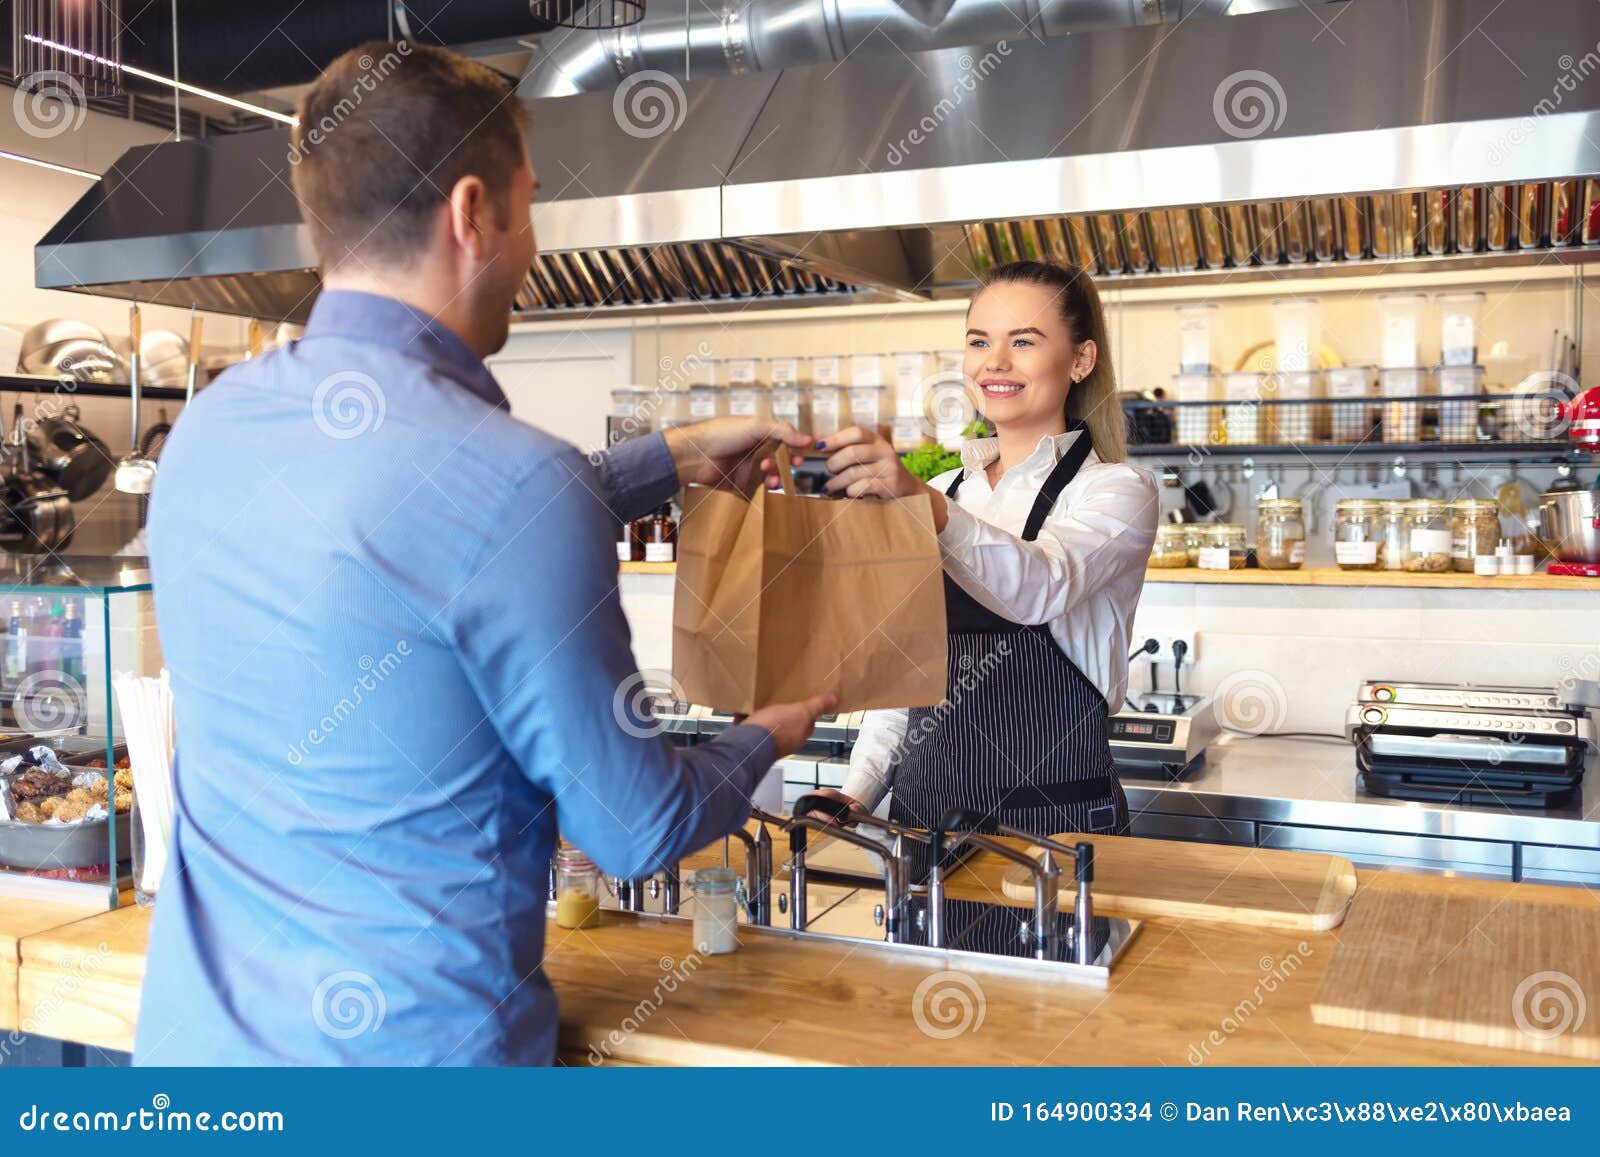 happy waitress waring apron serving customer at counter in small family eatery restaurant